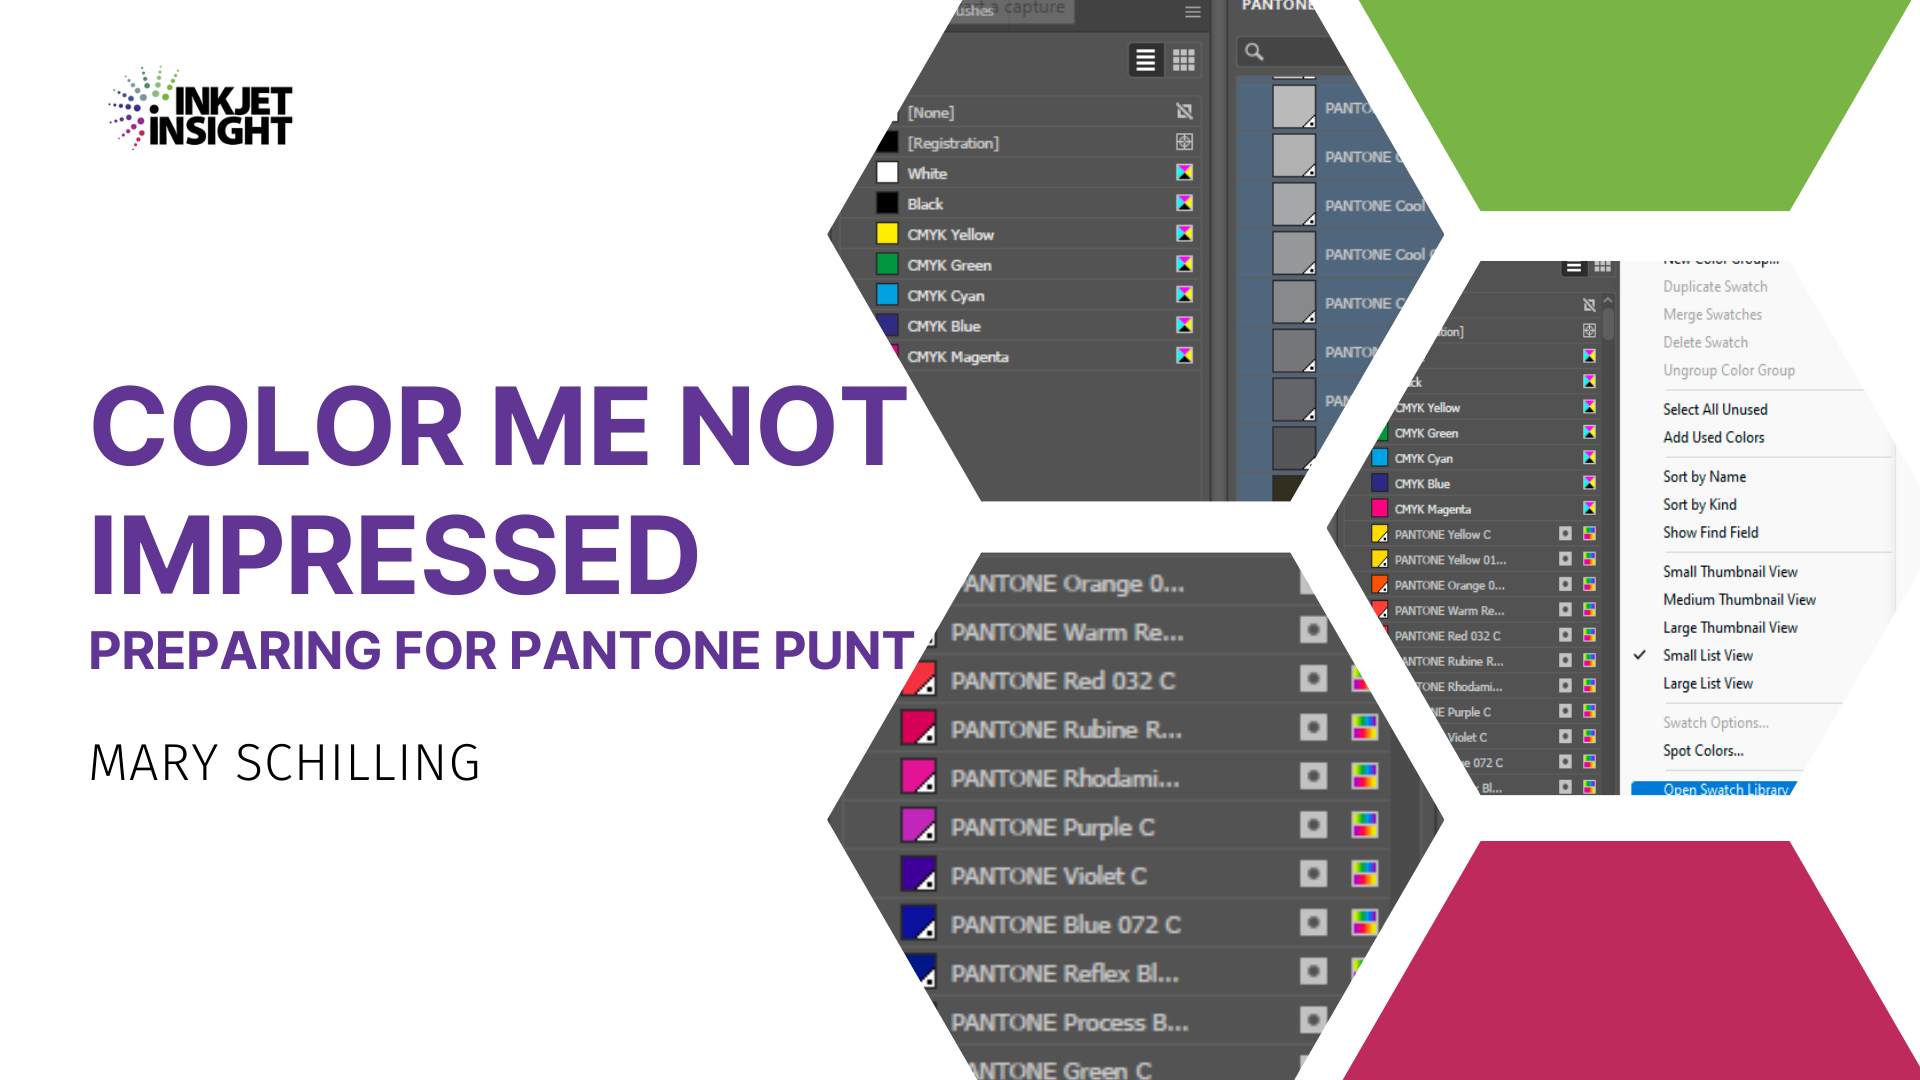 Featured image for “Color Me Not Impressed – Preparing for Pantone Punt”